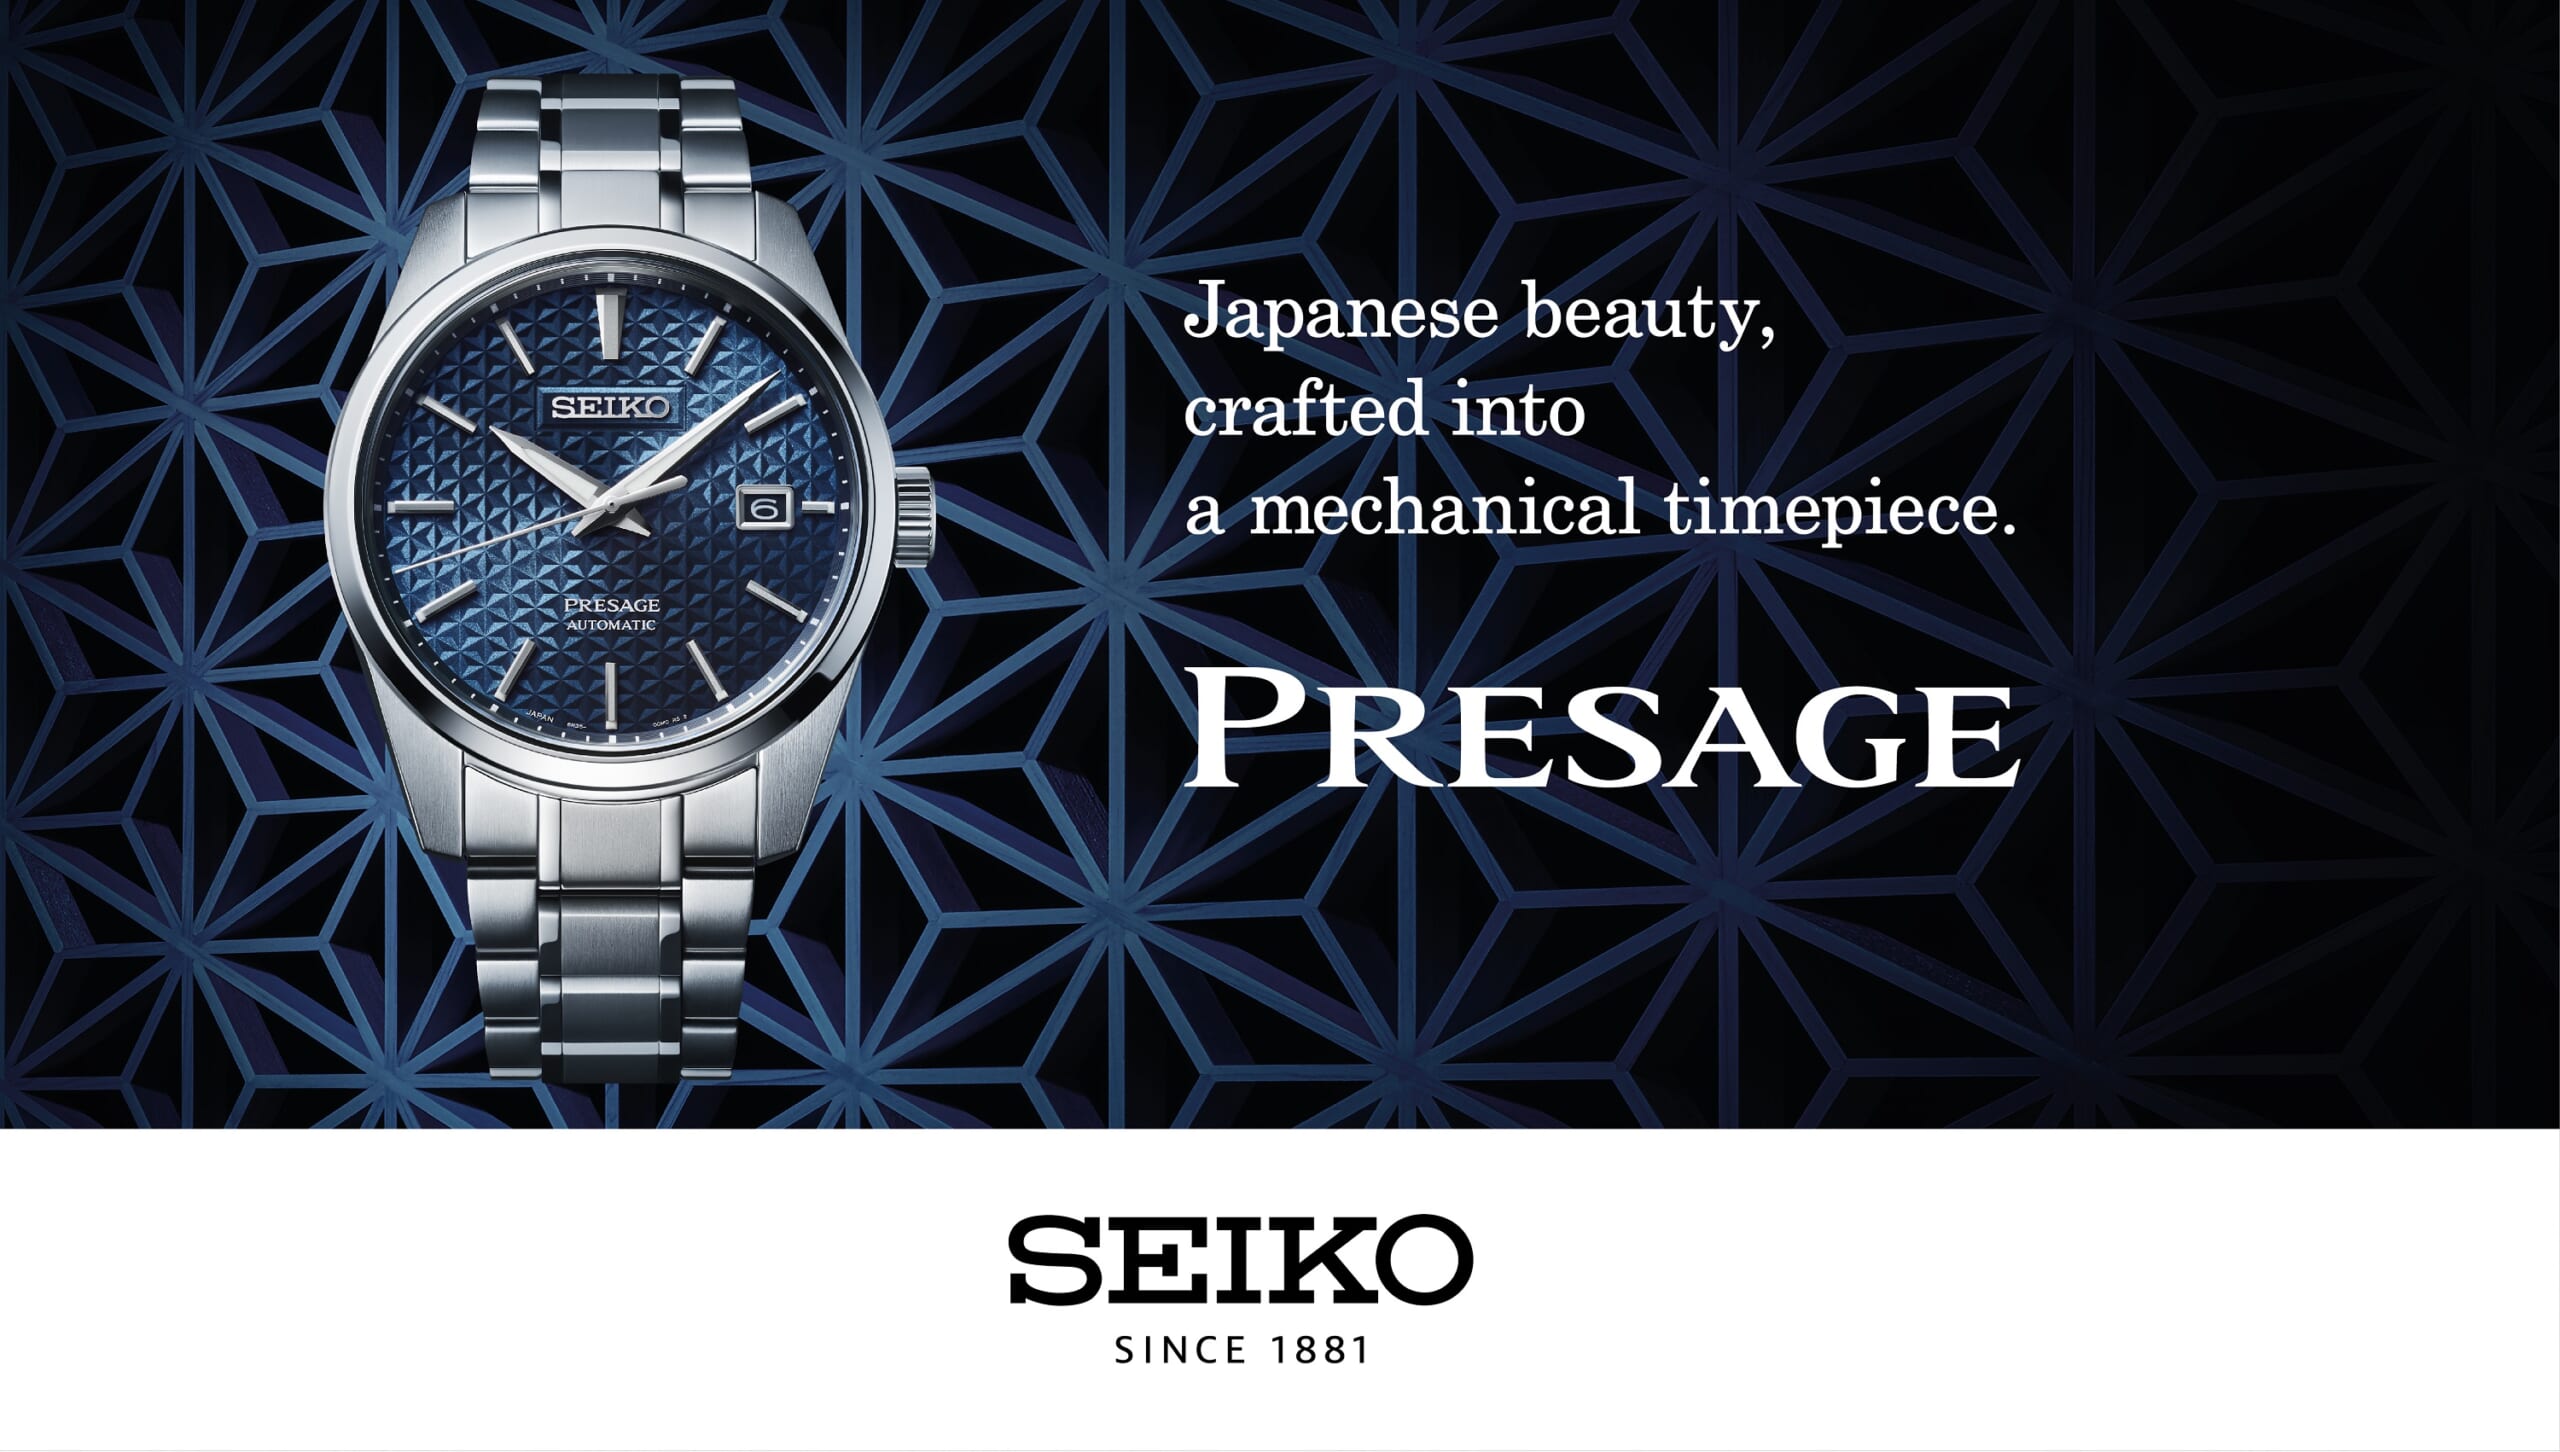 SEIKO PHILIPPINES: Moving Ahead. Touching Hearts. | Philippine Primer